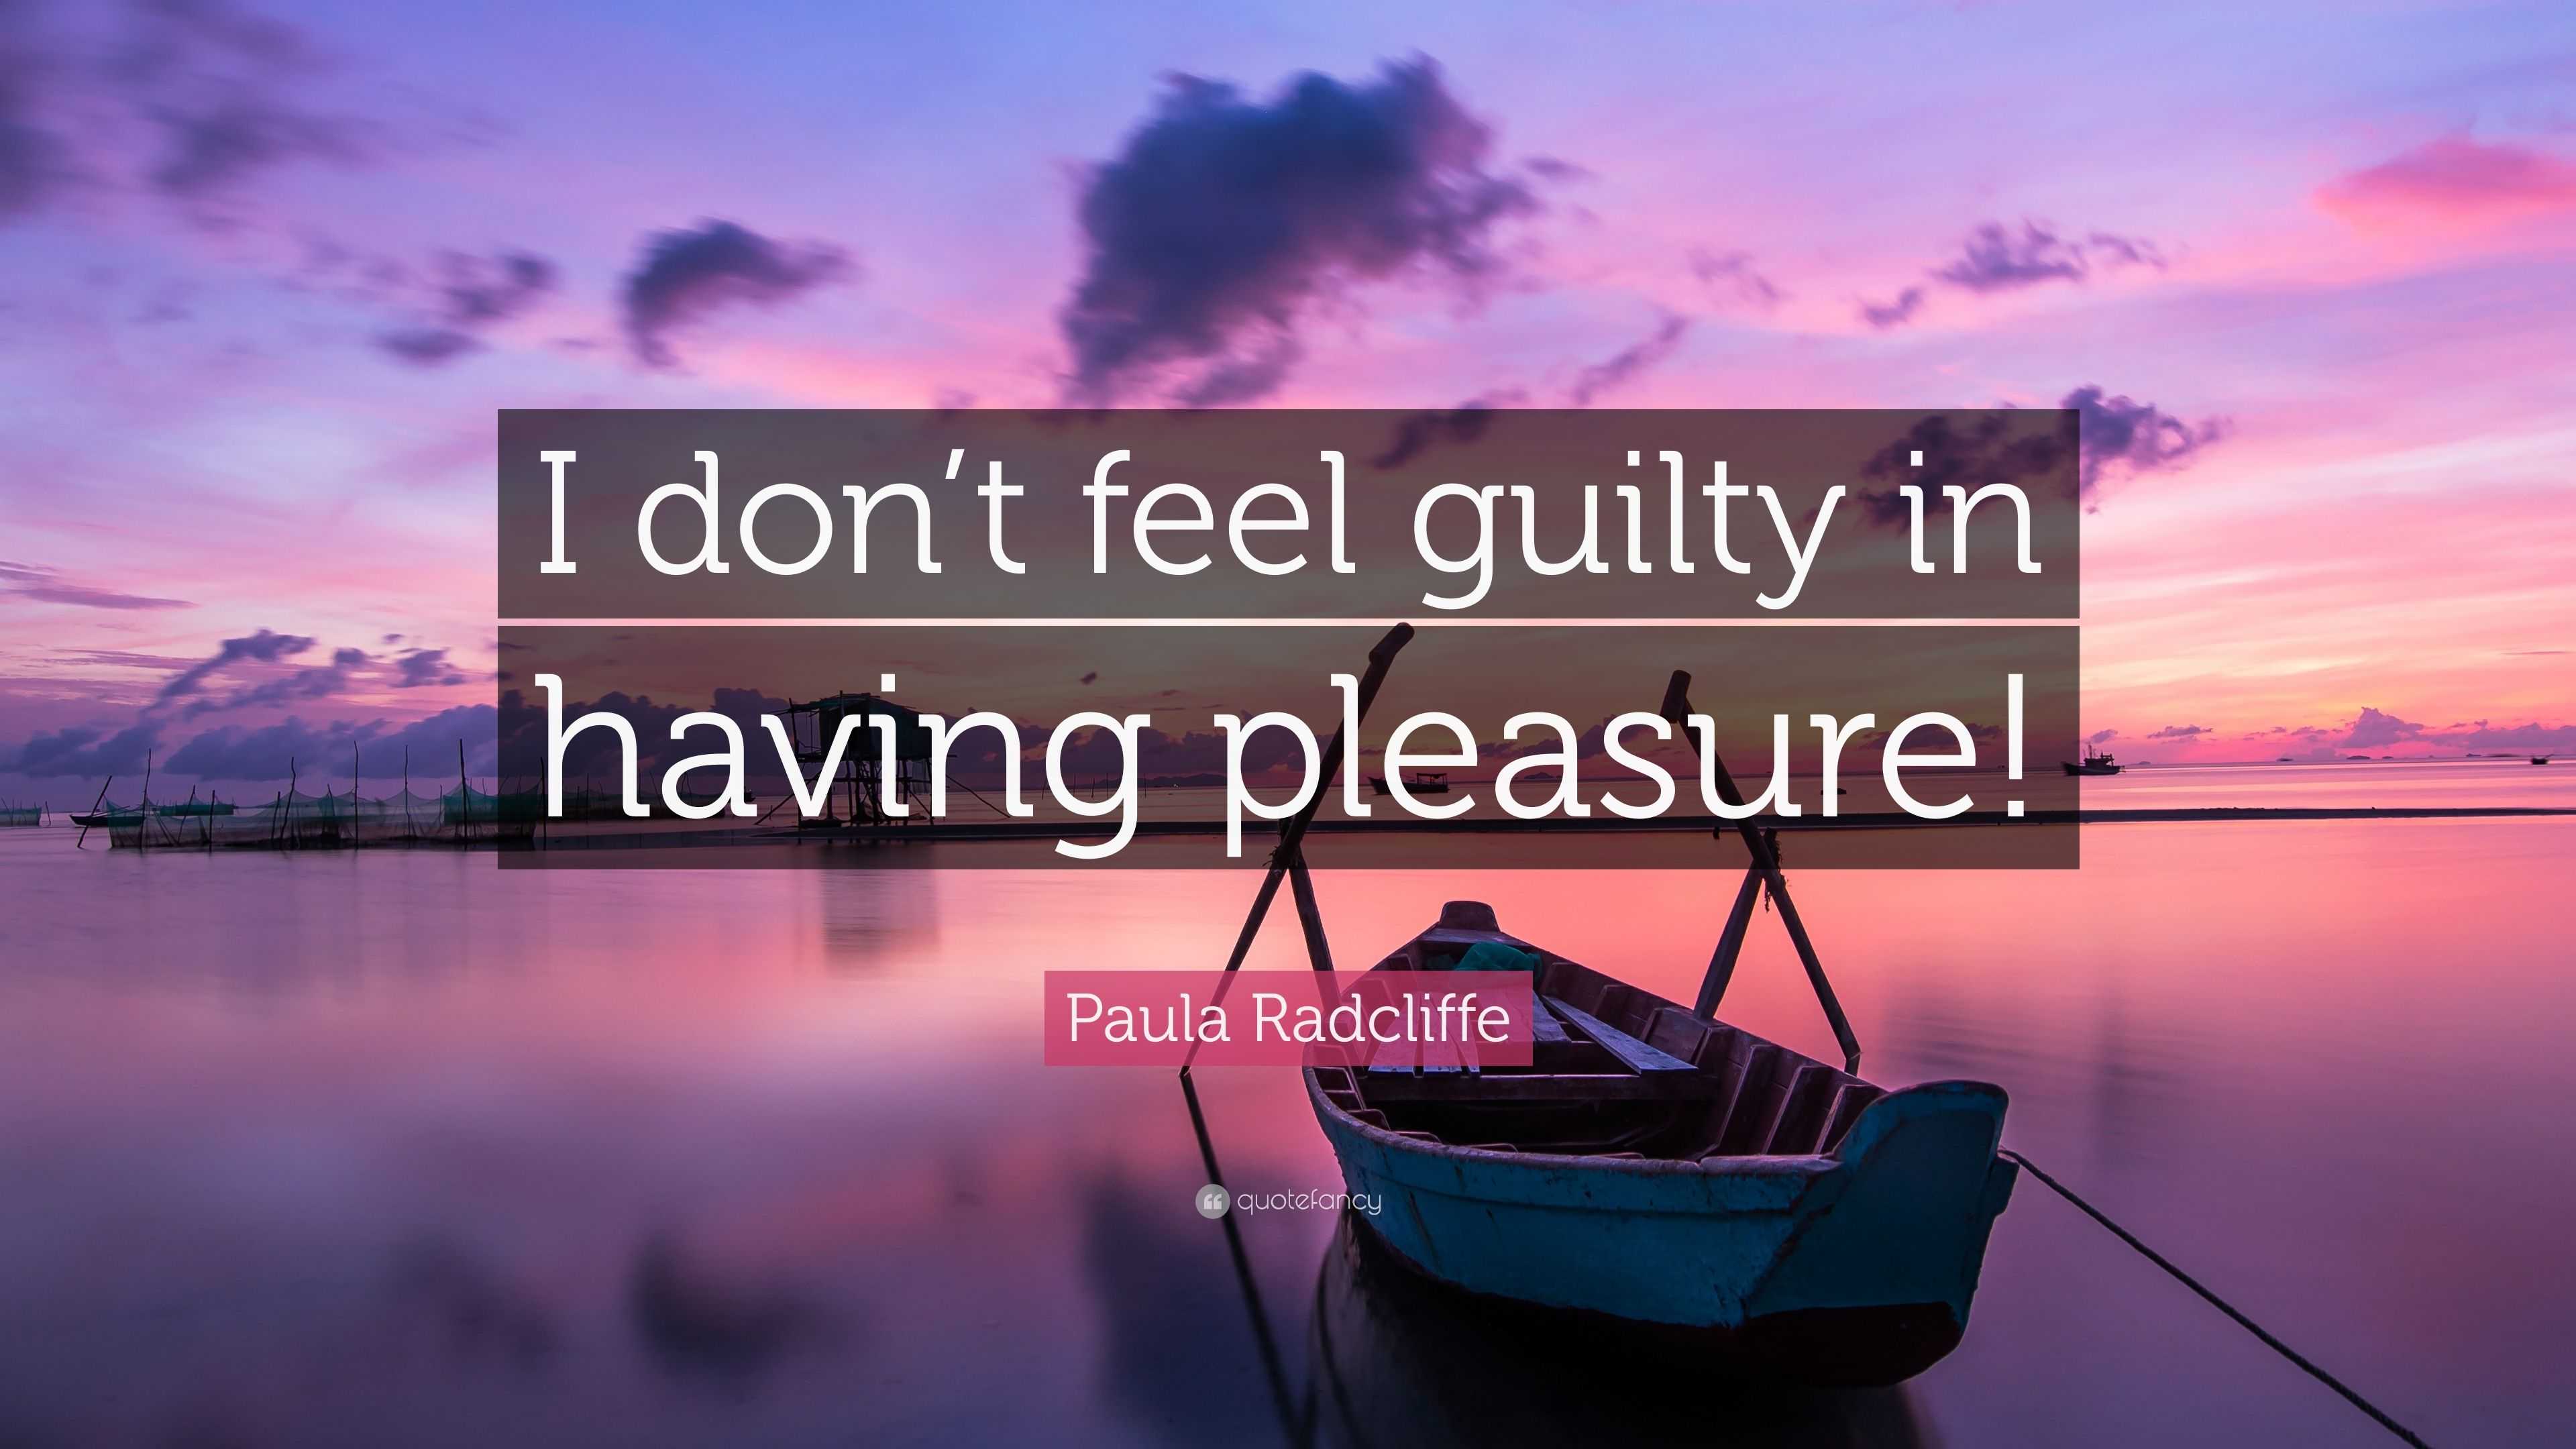 Paula Radcliffe Quote: “I don't feel guilty in having pleasure!”